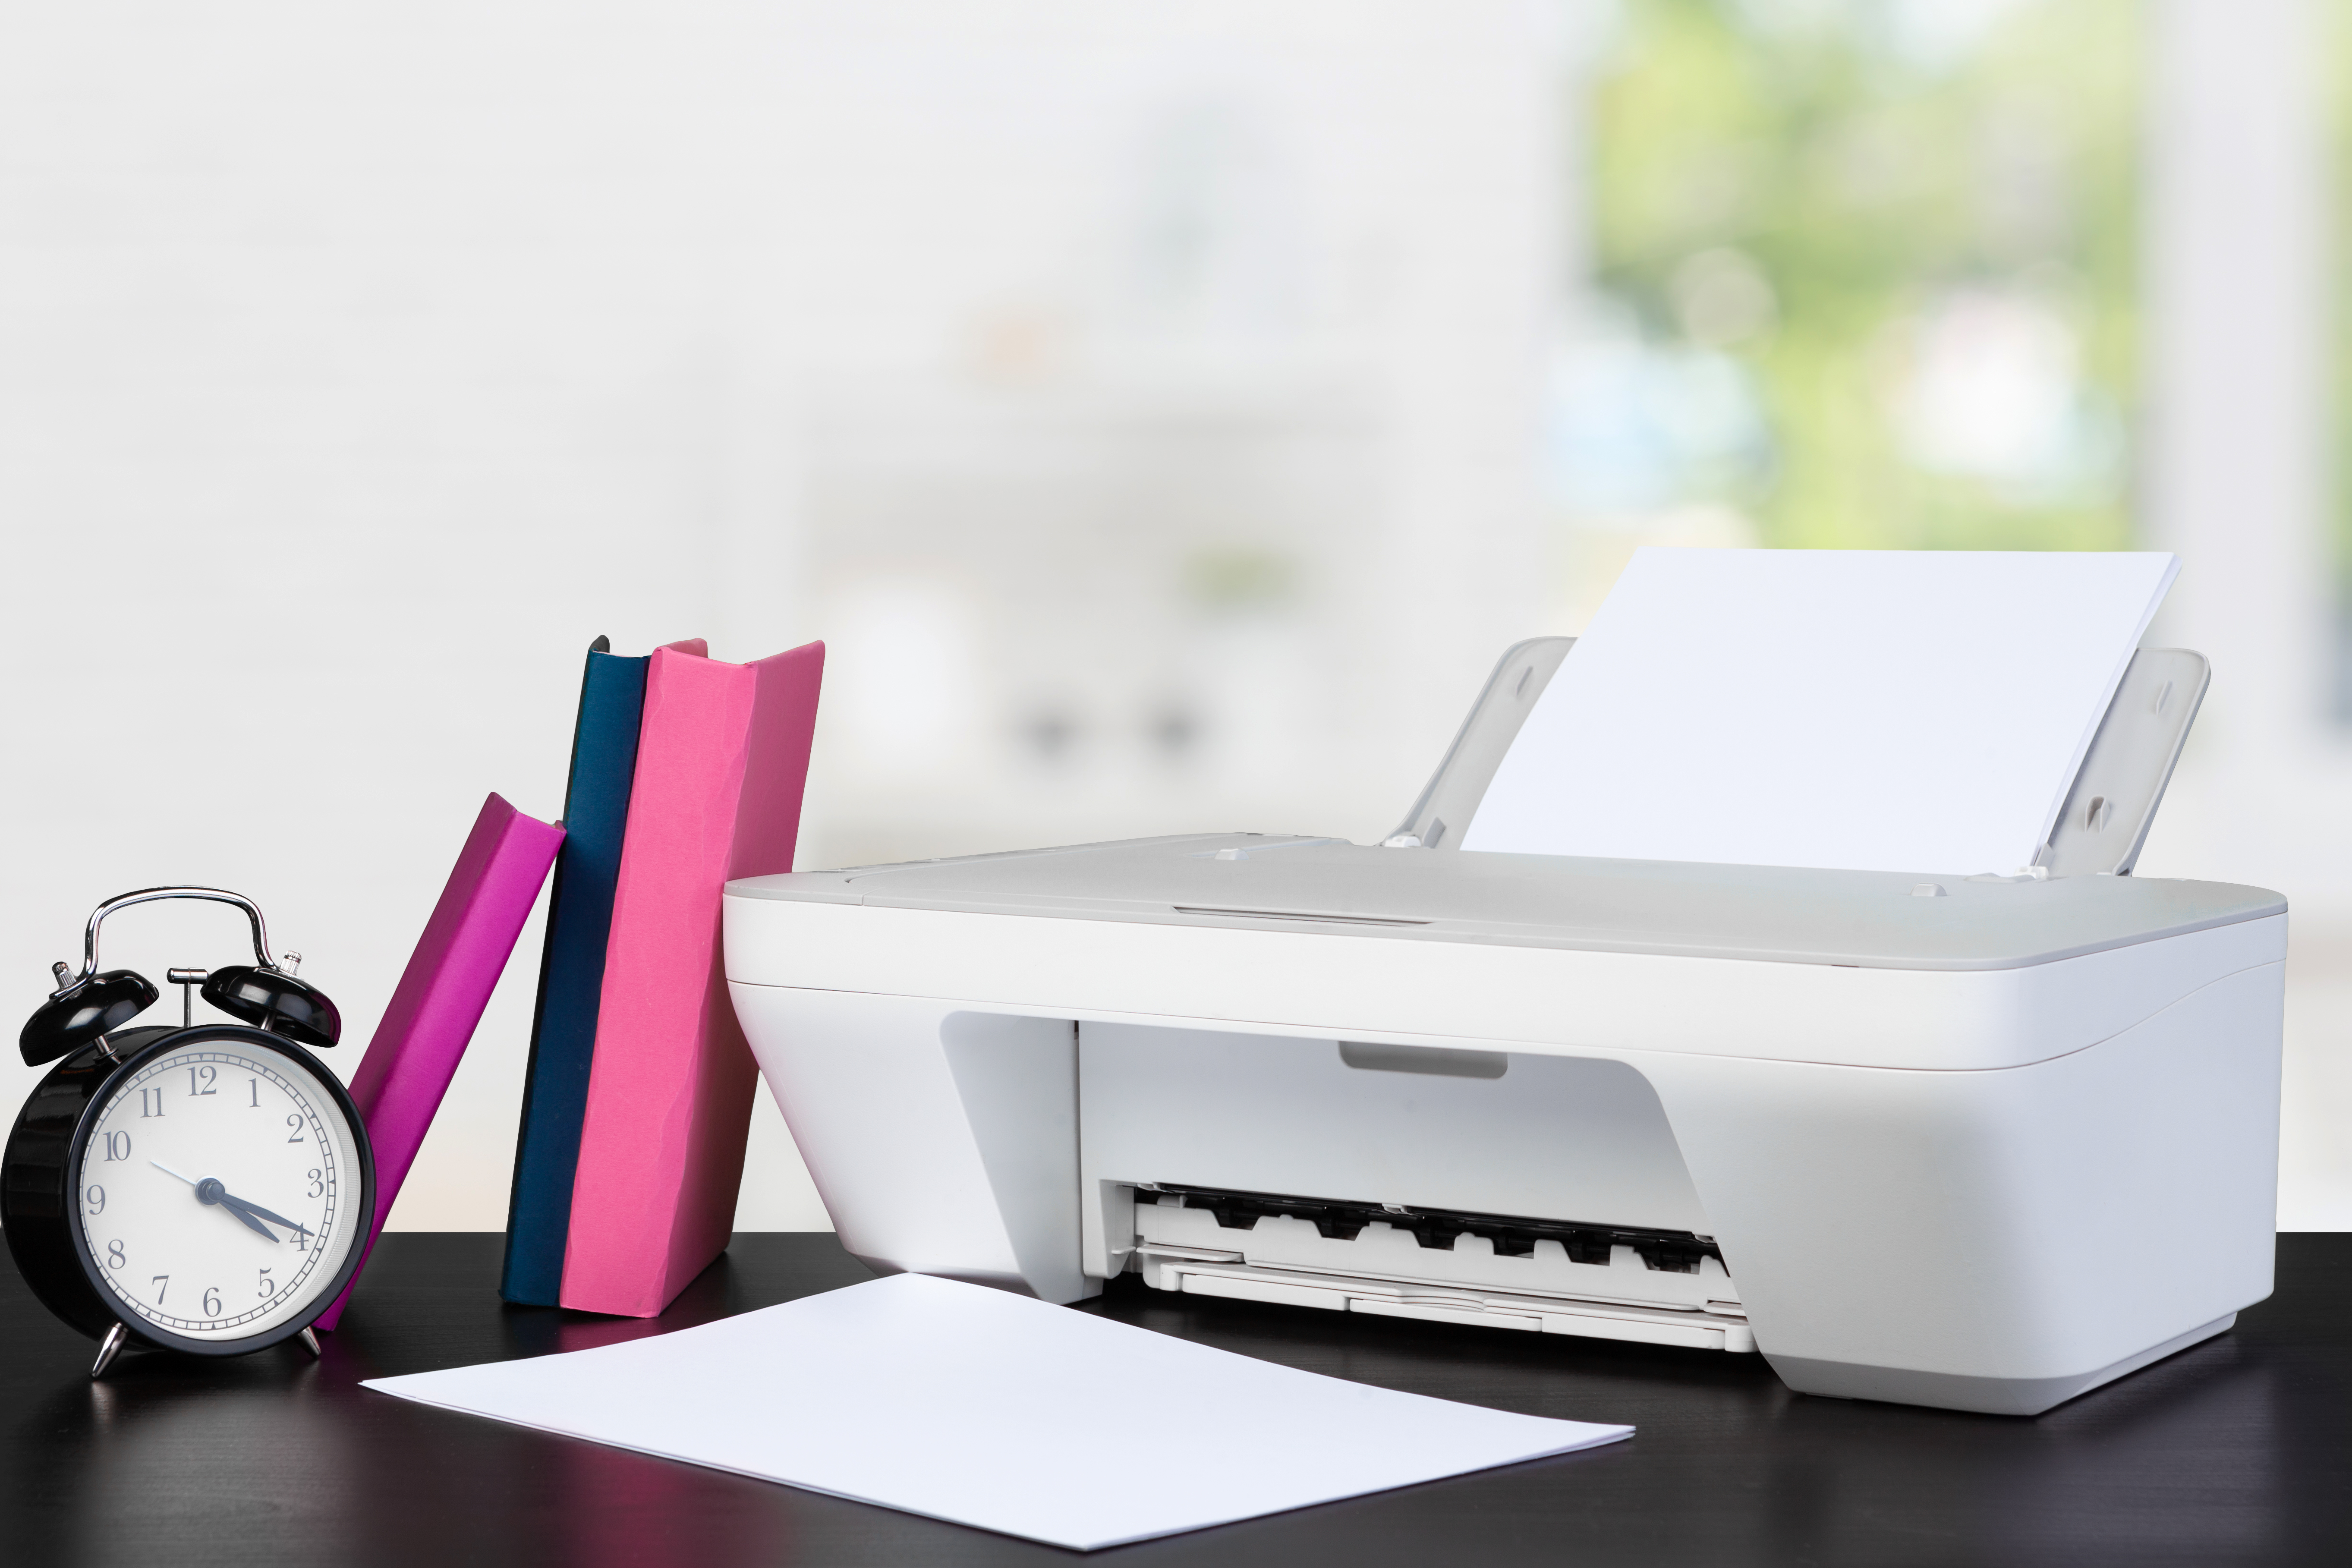 Printing on a Budget: Affordable Printers and Ink Options